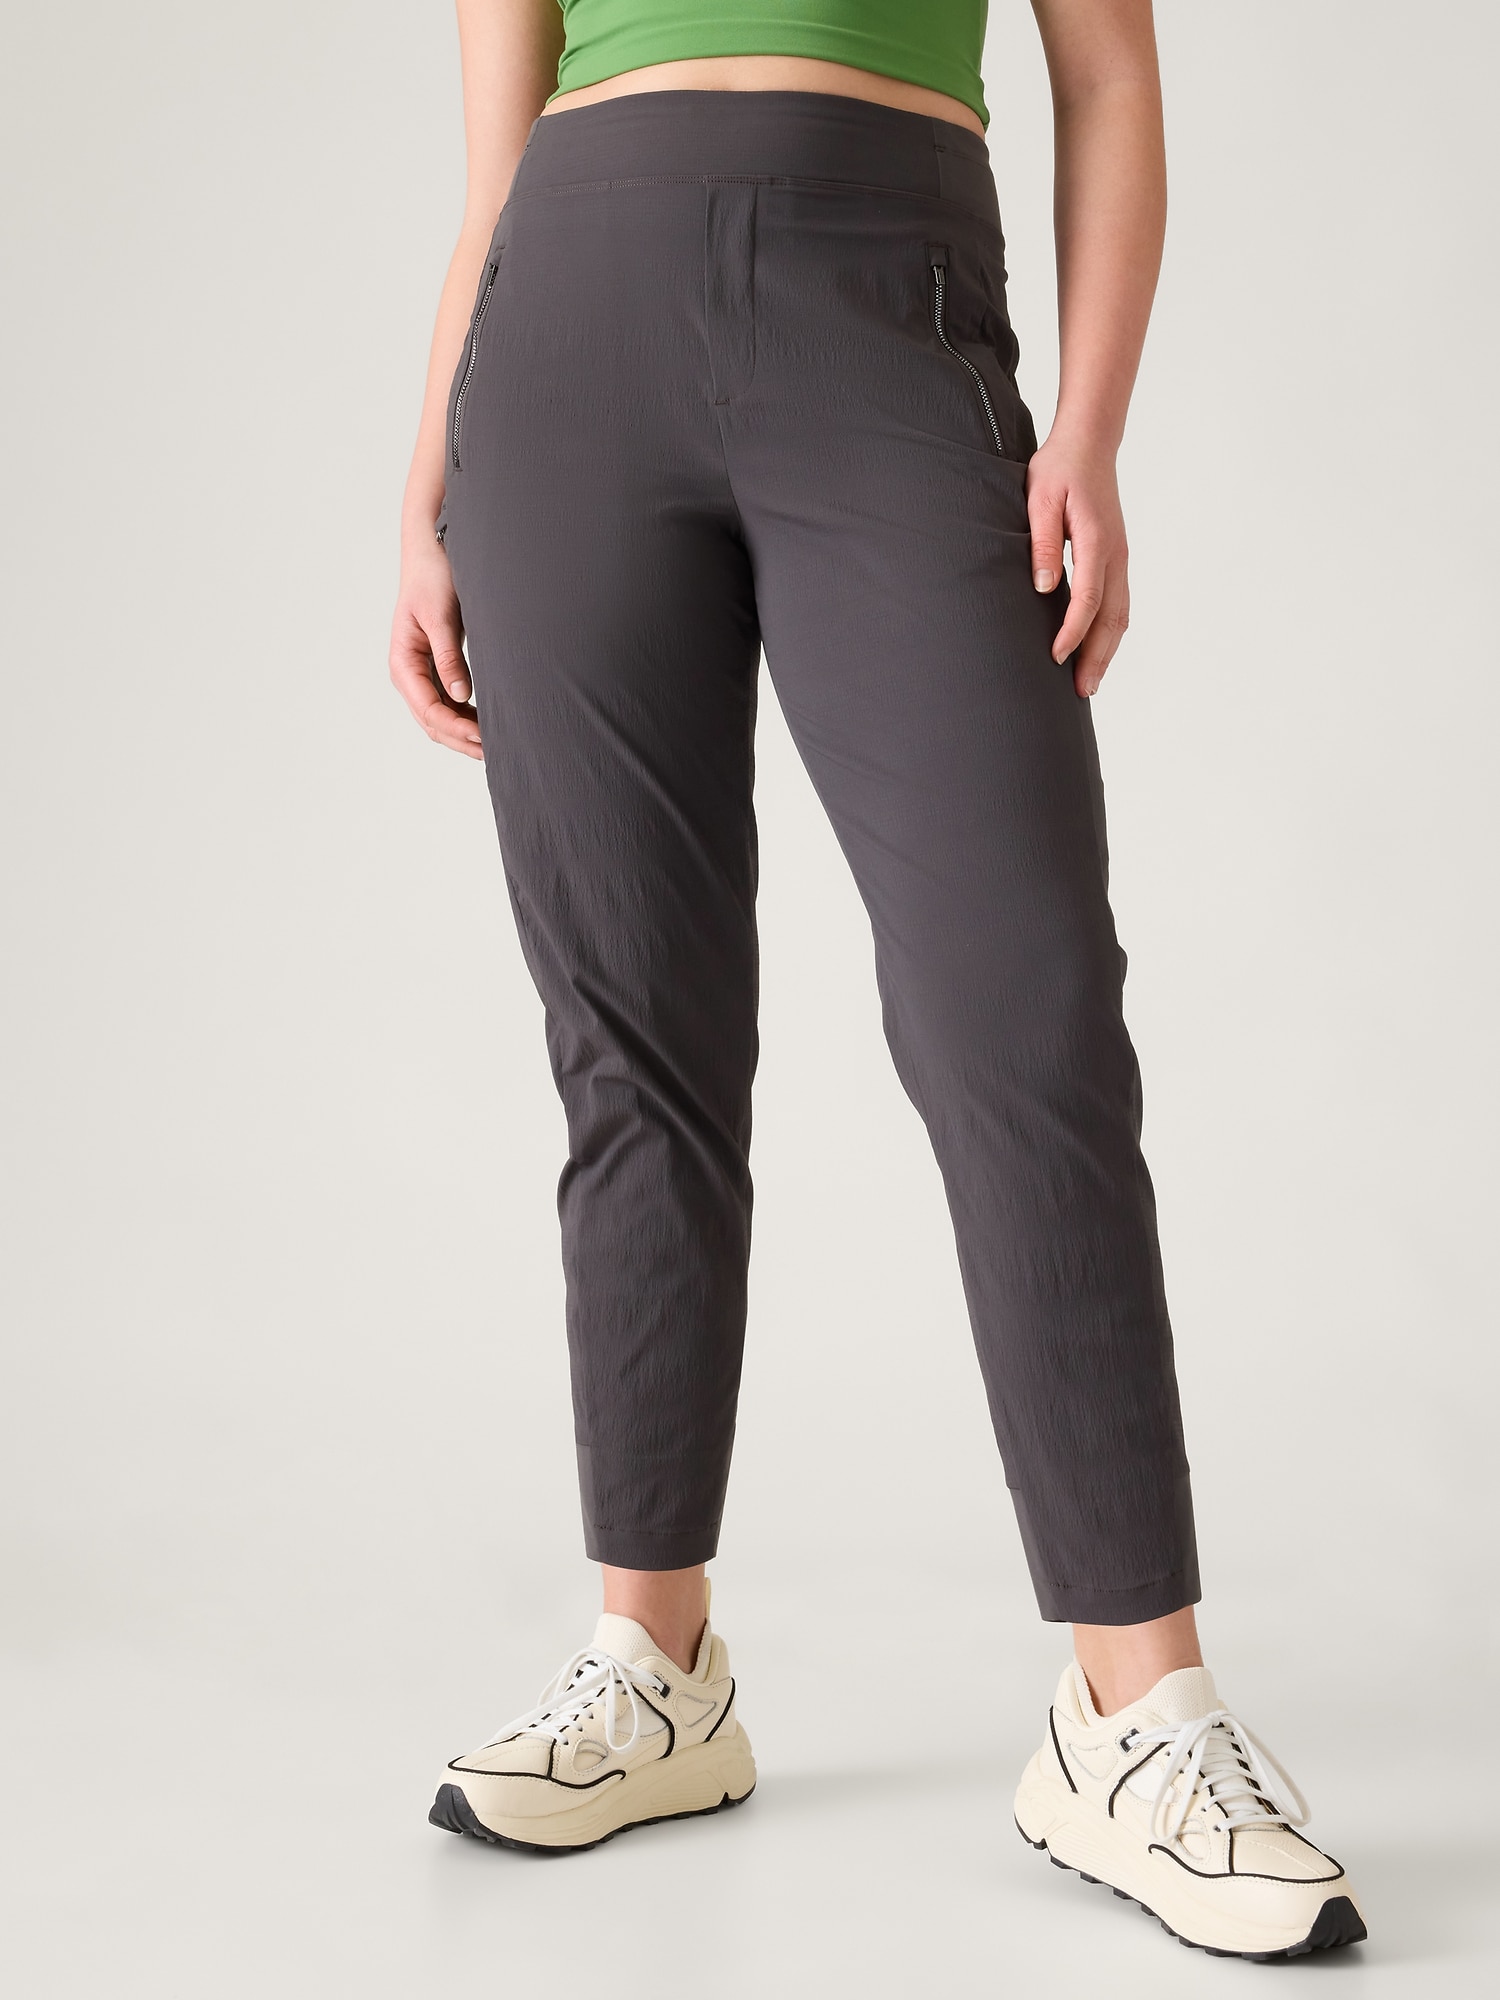 Athleta - Adventure awaits, prepare accordingly ⛰ Reintroducing the Trekkie  North Jogger, now with a buttery-soft Powervita waistband for made-to-move  stretch. Shop Trekkie:  #PowerOfShe